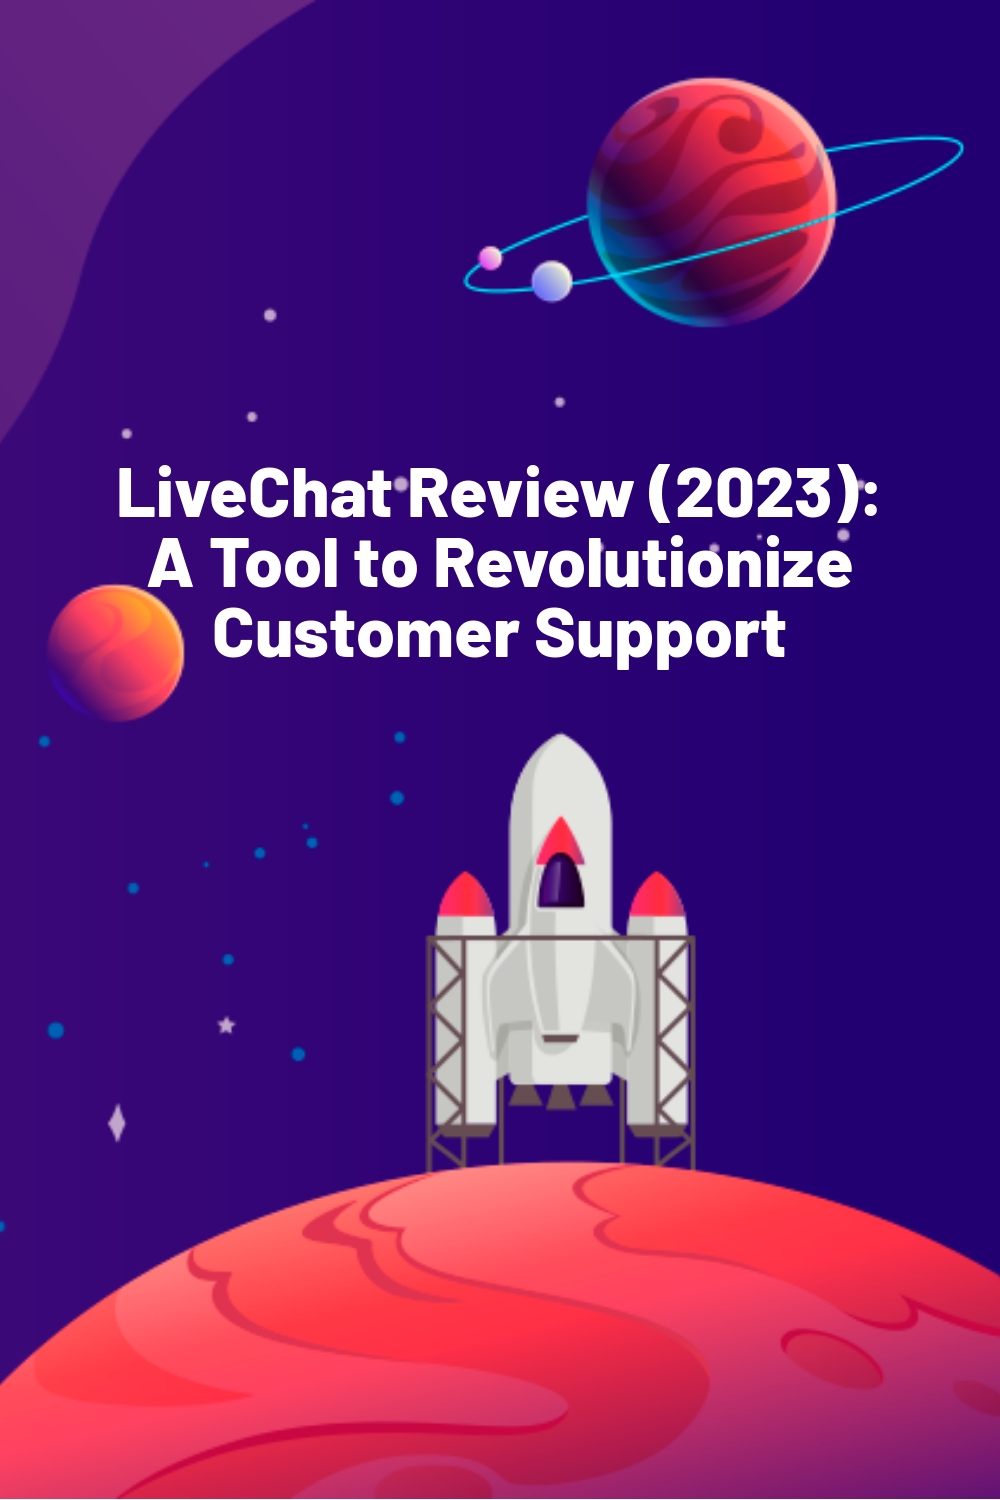 LiveChat Review (2023): A Tool to Revolutionize Customer Support